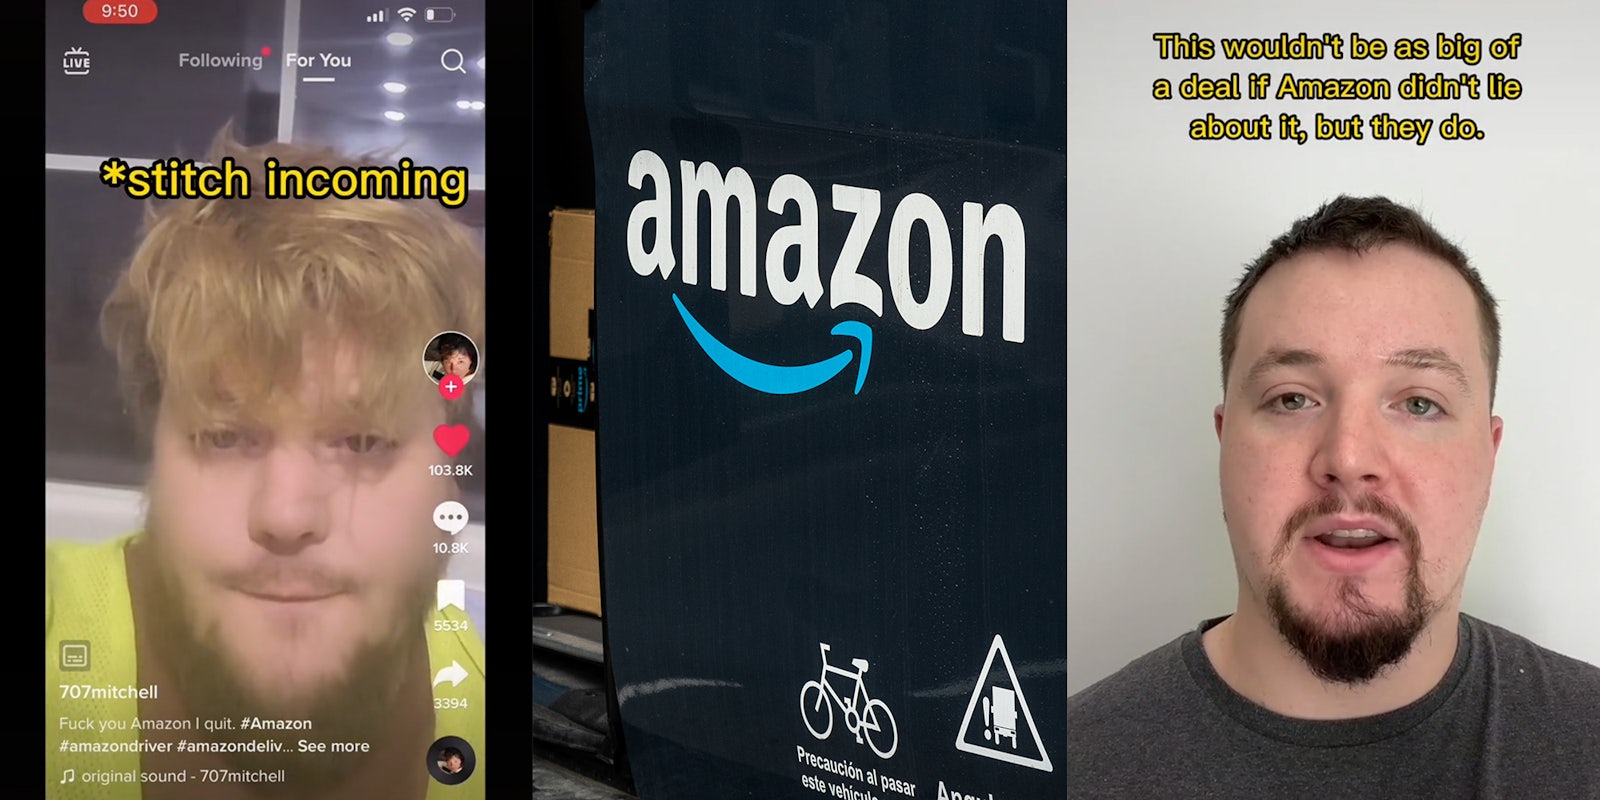 amazon driver (l) amazon prime van (c) man in room with caption 'this wouldn't be as big of a deal if Amazon didn't lie about it, but they do.' (r)